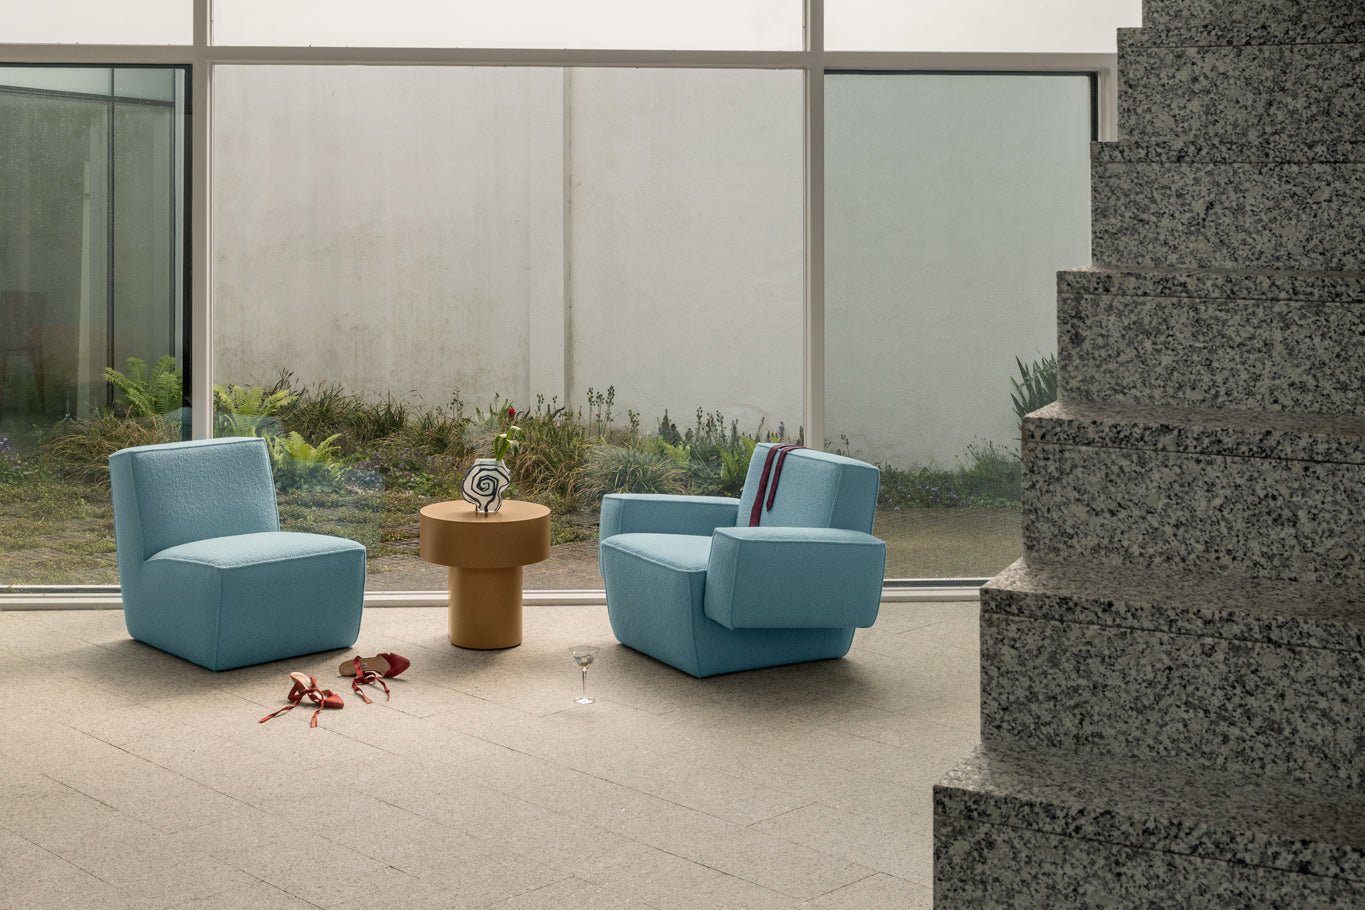 A lifestyle image of a lounge scene featuring Hunk Lounge Chair, Hunk Lounge Chair with Armrests, and Stump Side Tables.